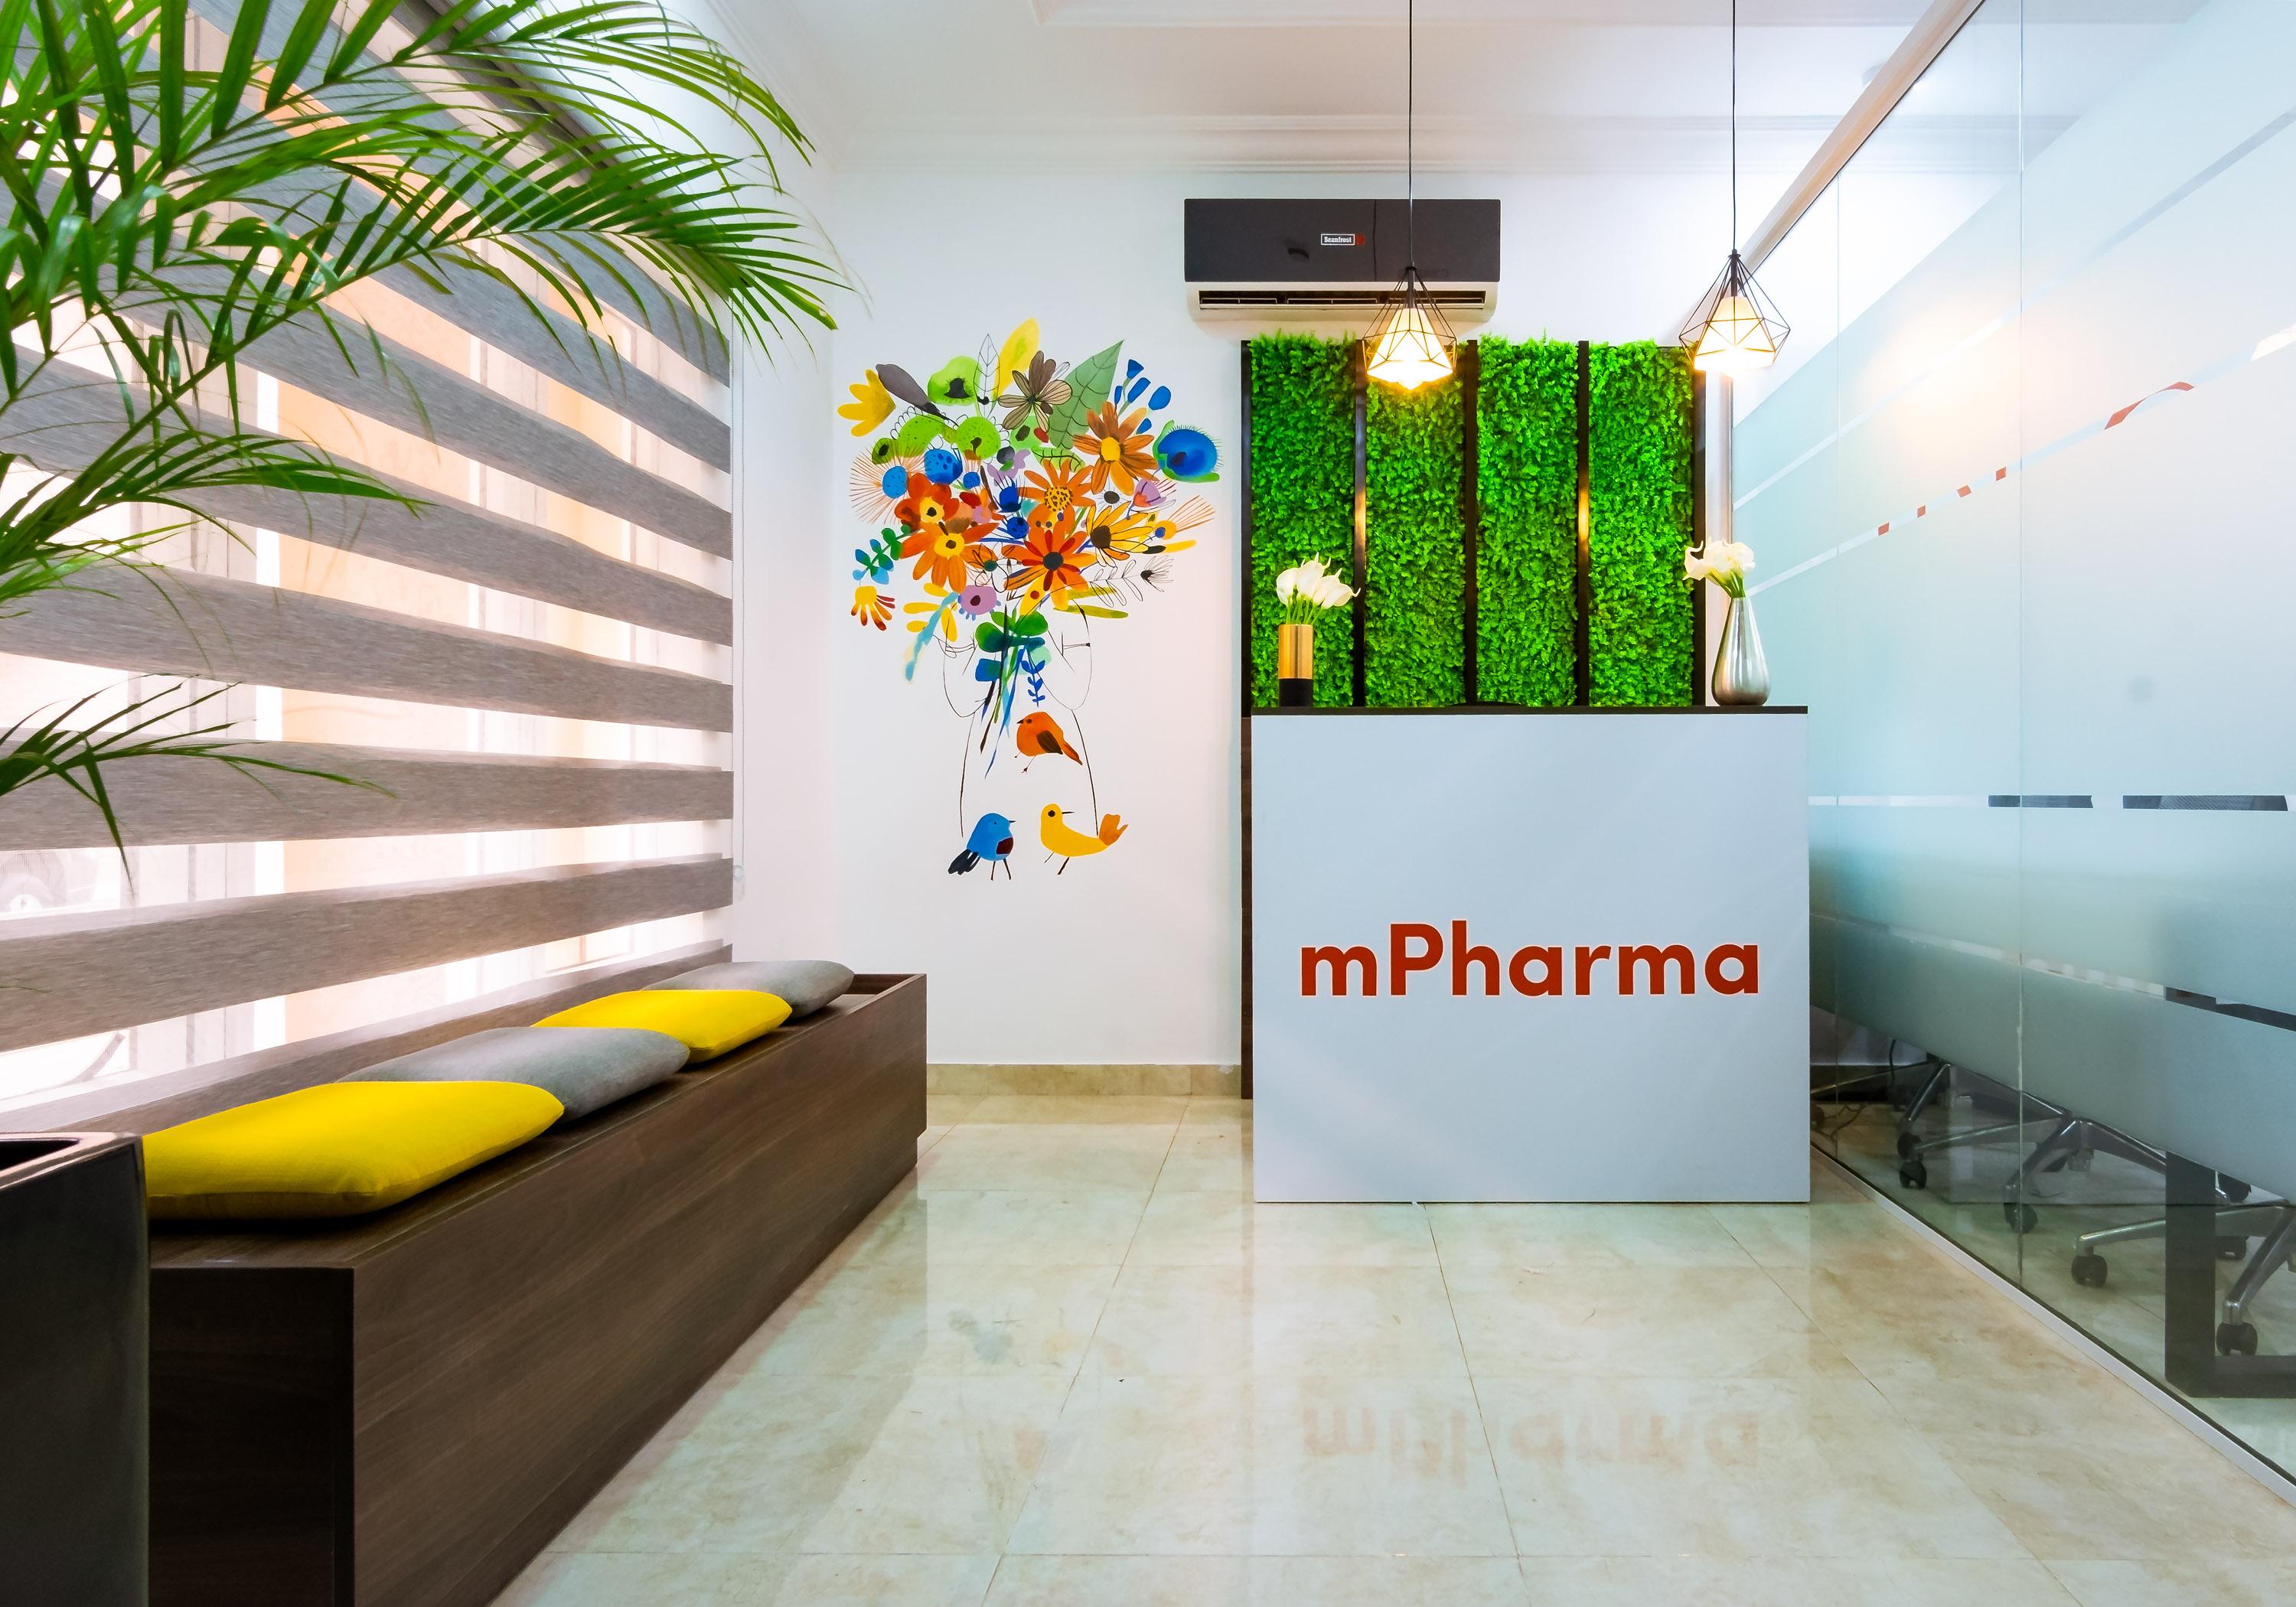 Exclusive: mPharma lays off 150 employees due to tightening macroenomic conditions